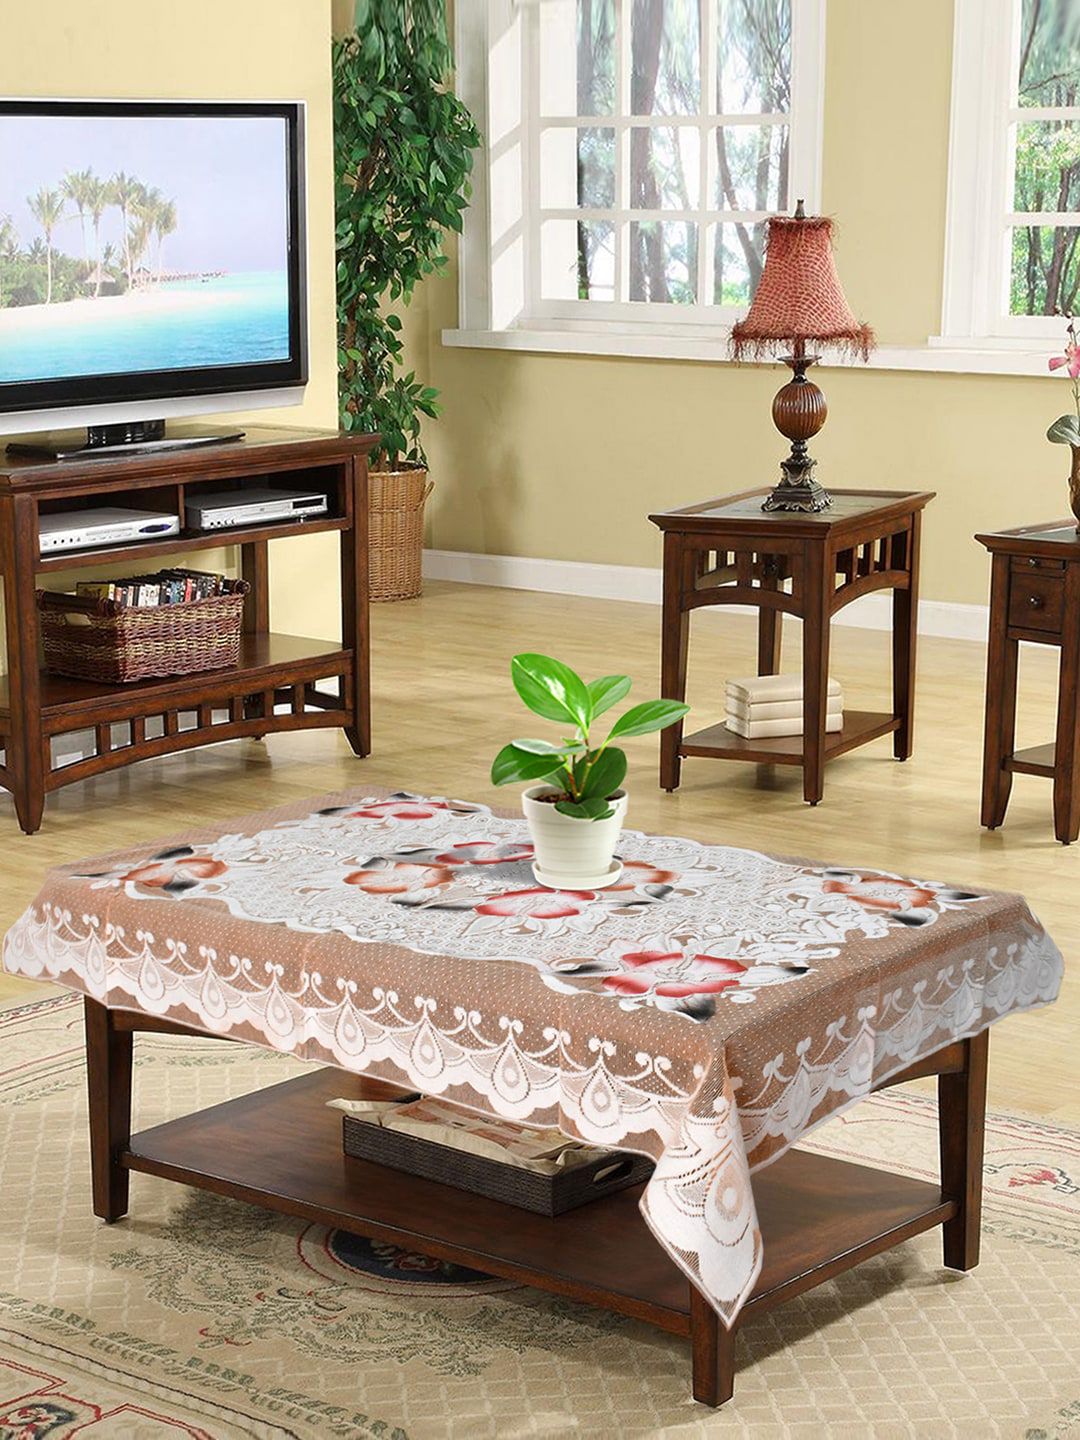 Kuber Industries Pink & Brown Floral Printed 4-Seater Rectangle Cotton Table Cover Price in India